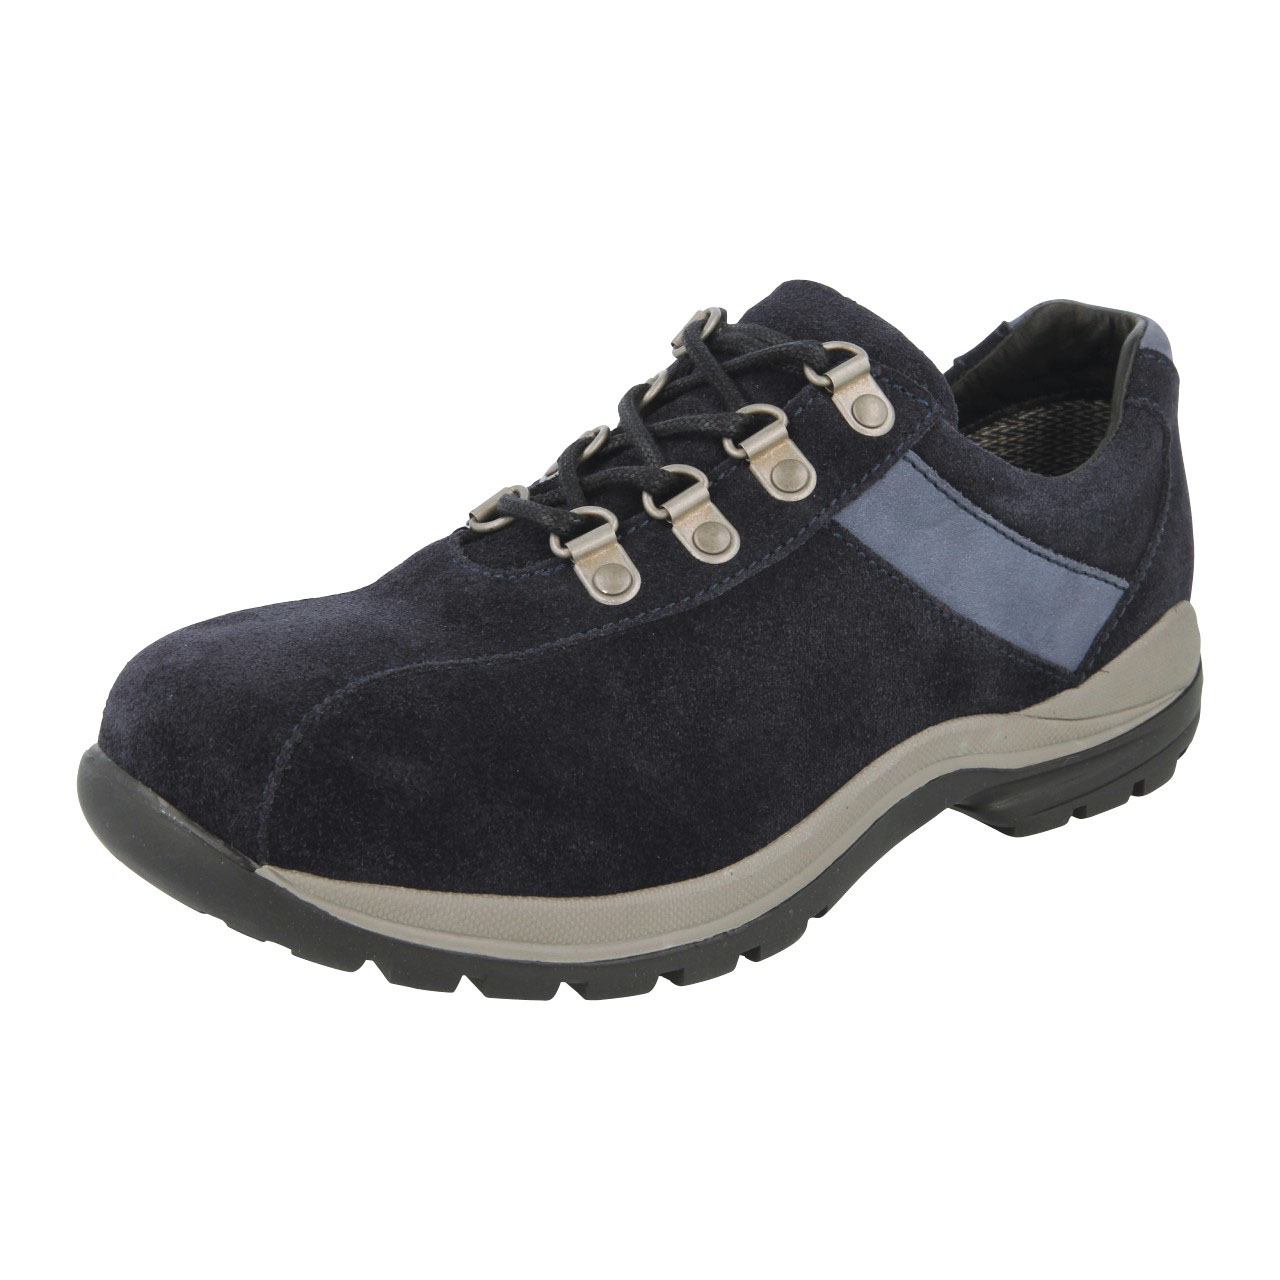 Extra-Wide Unisex Suede Walking Shoes